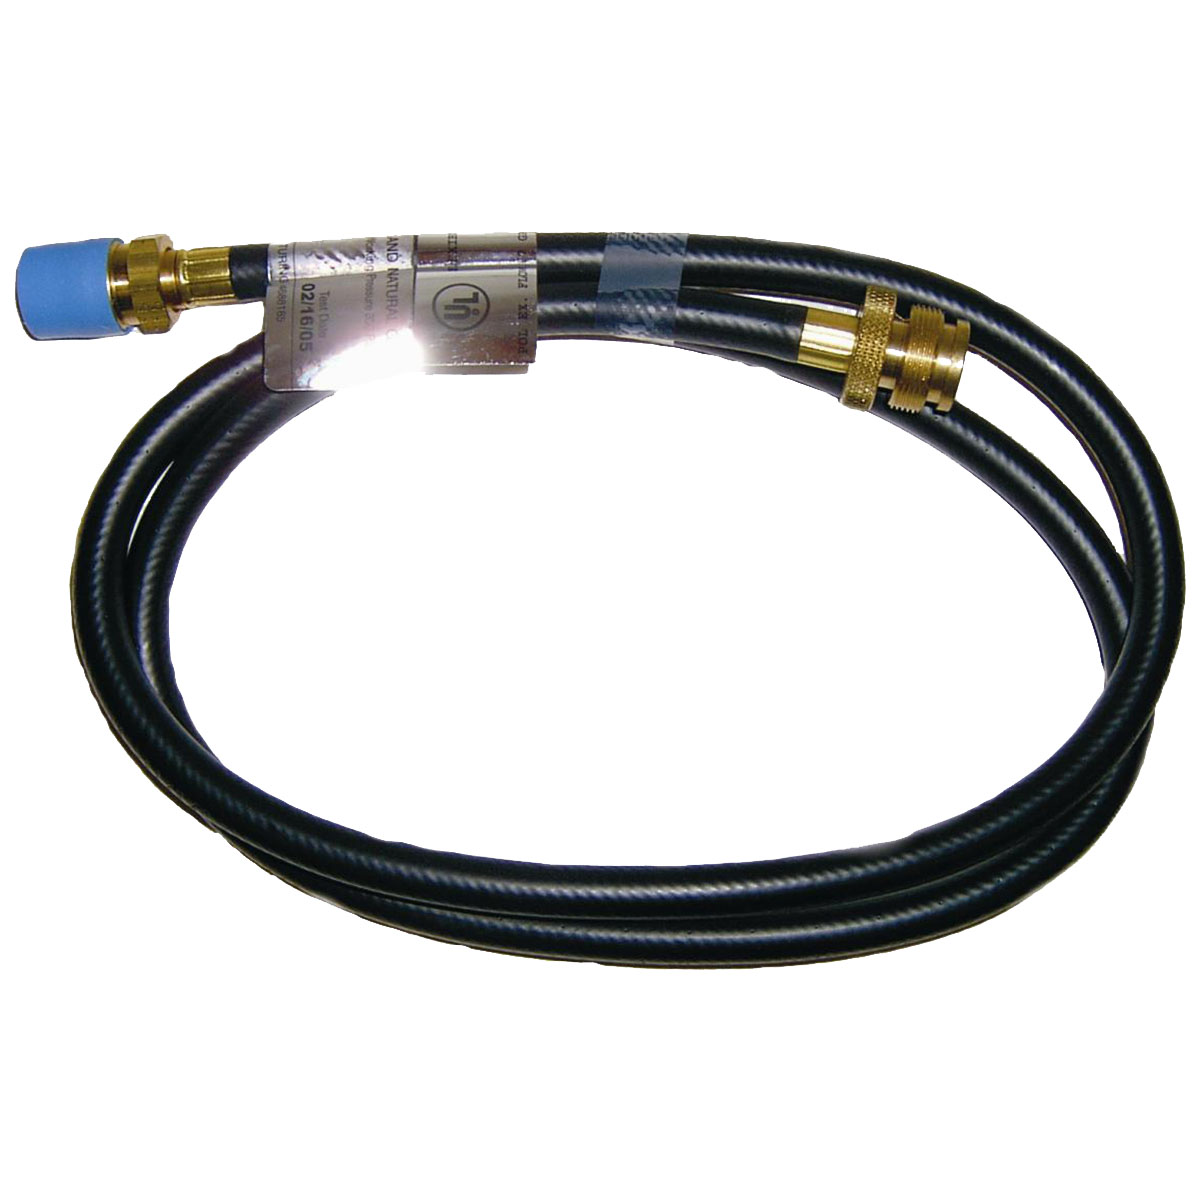 Picture of 21 Century R03 5 ft. Propane Hose Assembly